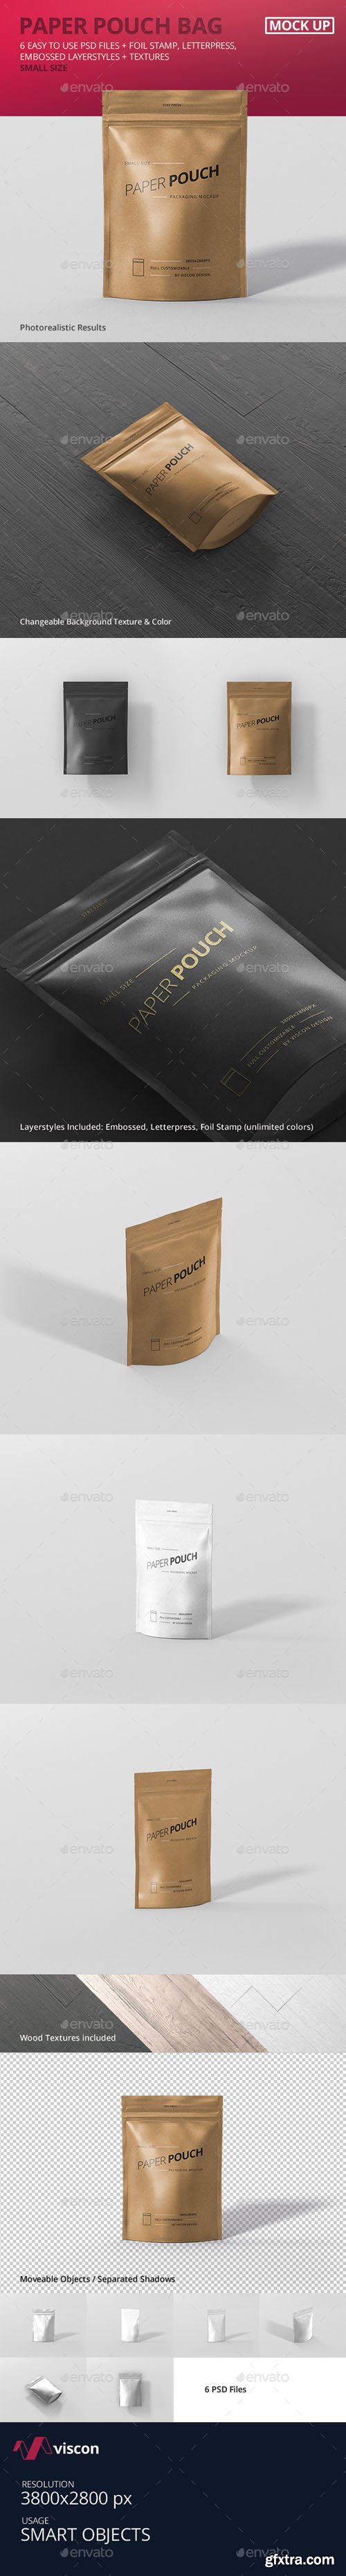 GR - Paper Pouch Bag Mockup Small Size 19389708